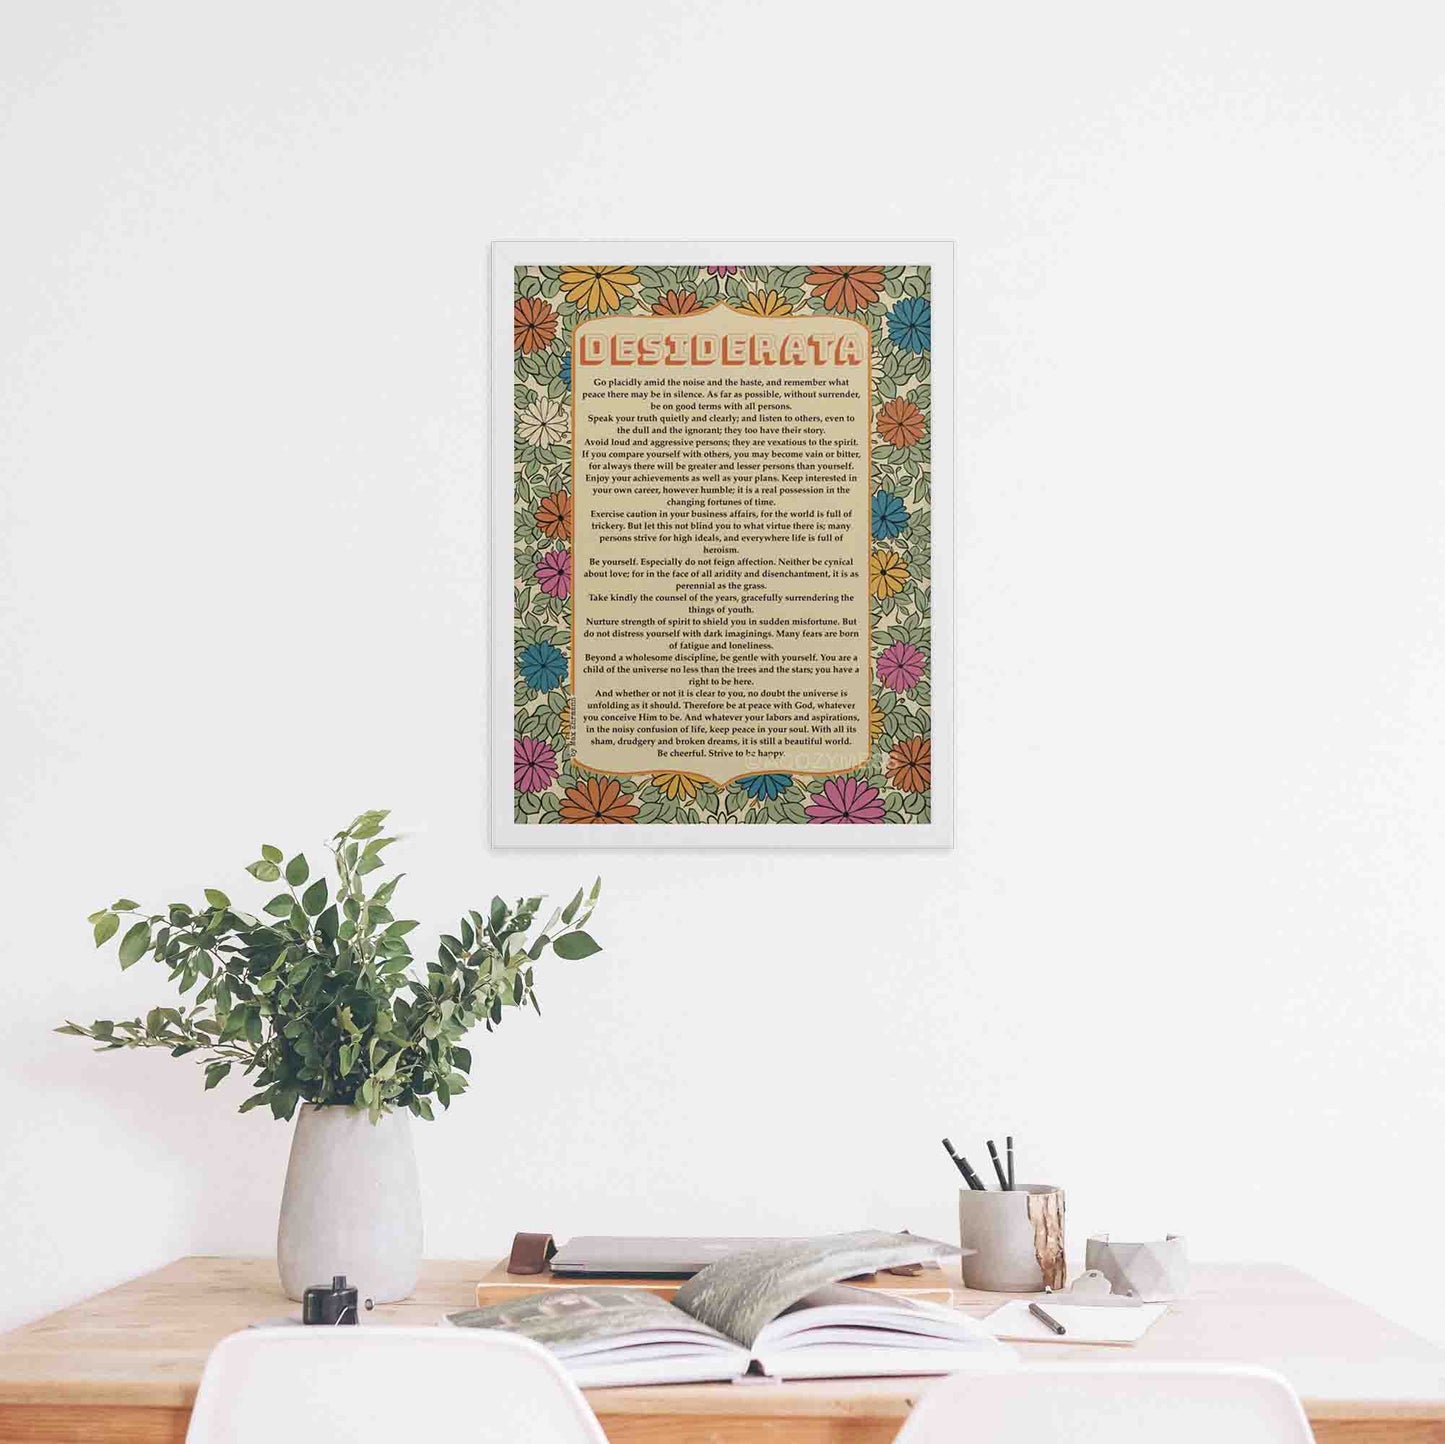 Desiderata poem Print with floral design in soothing colors in white frame